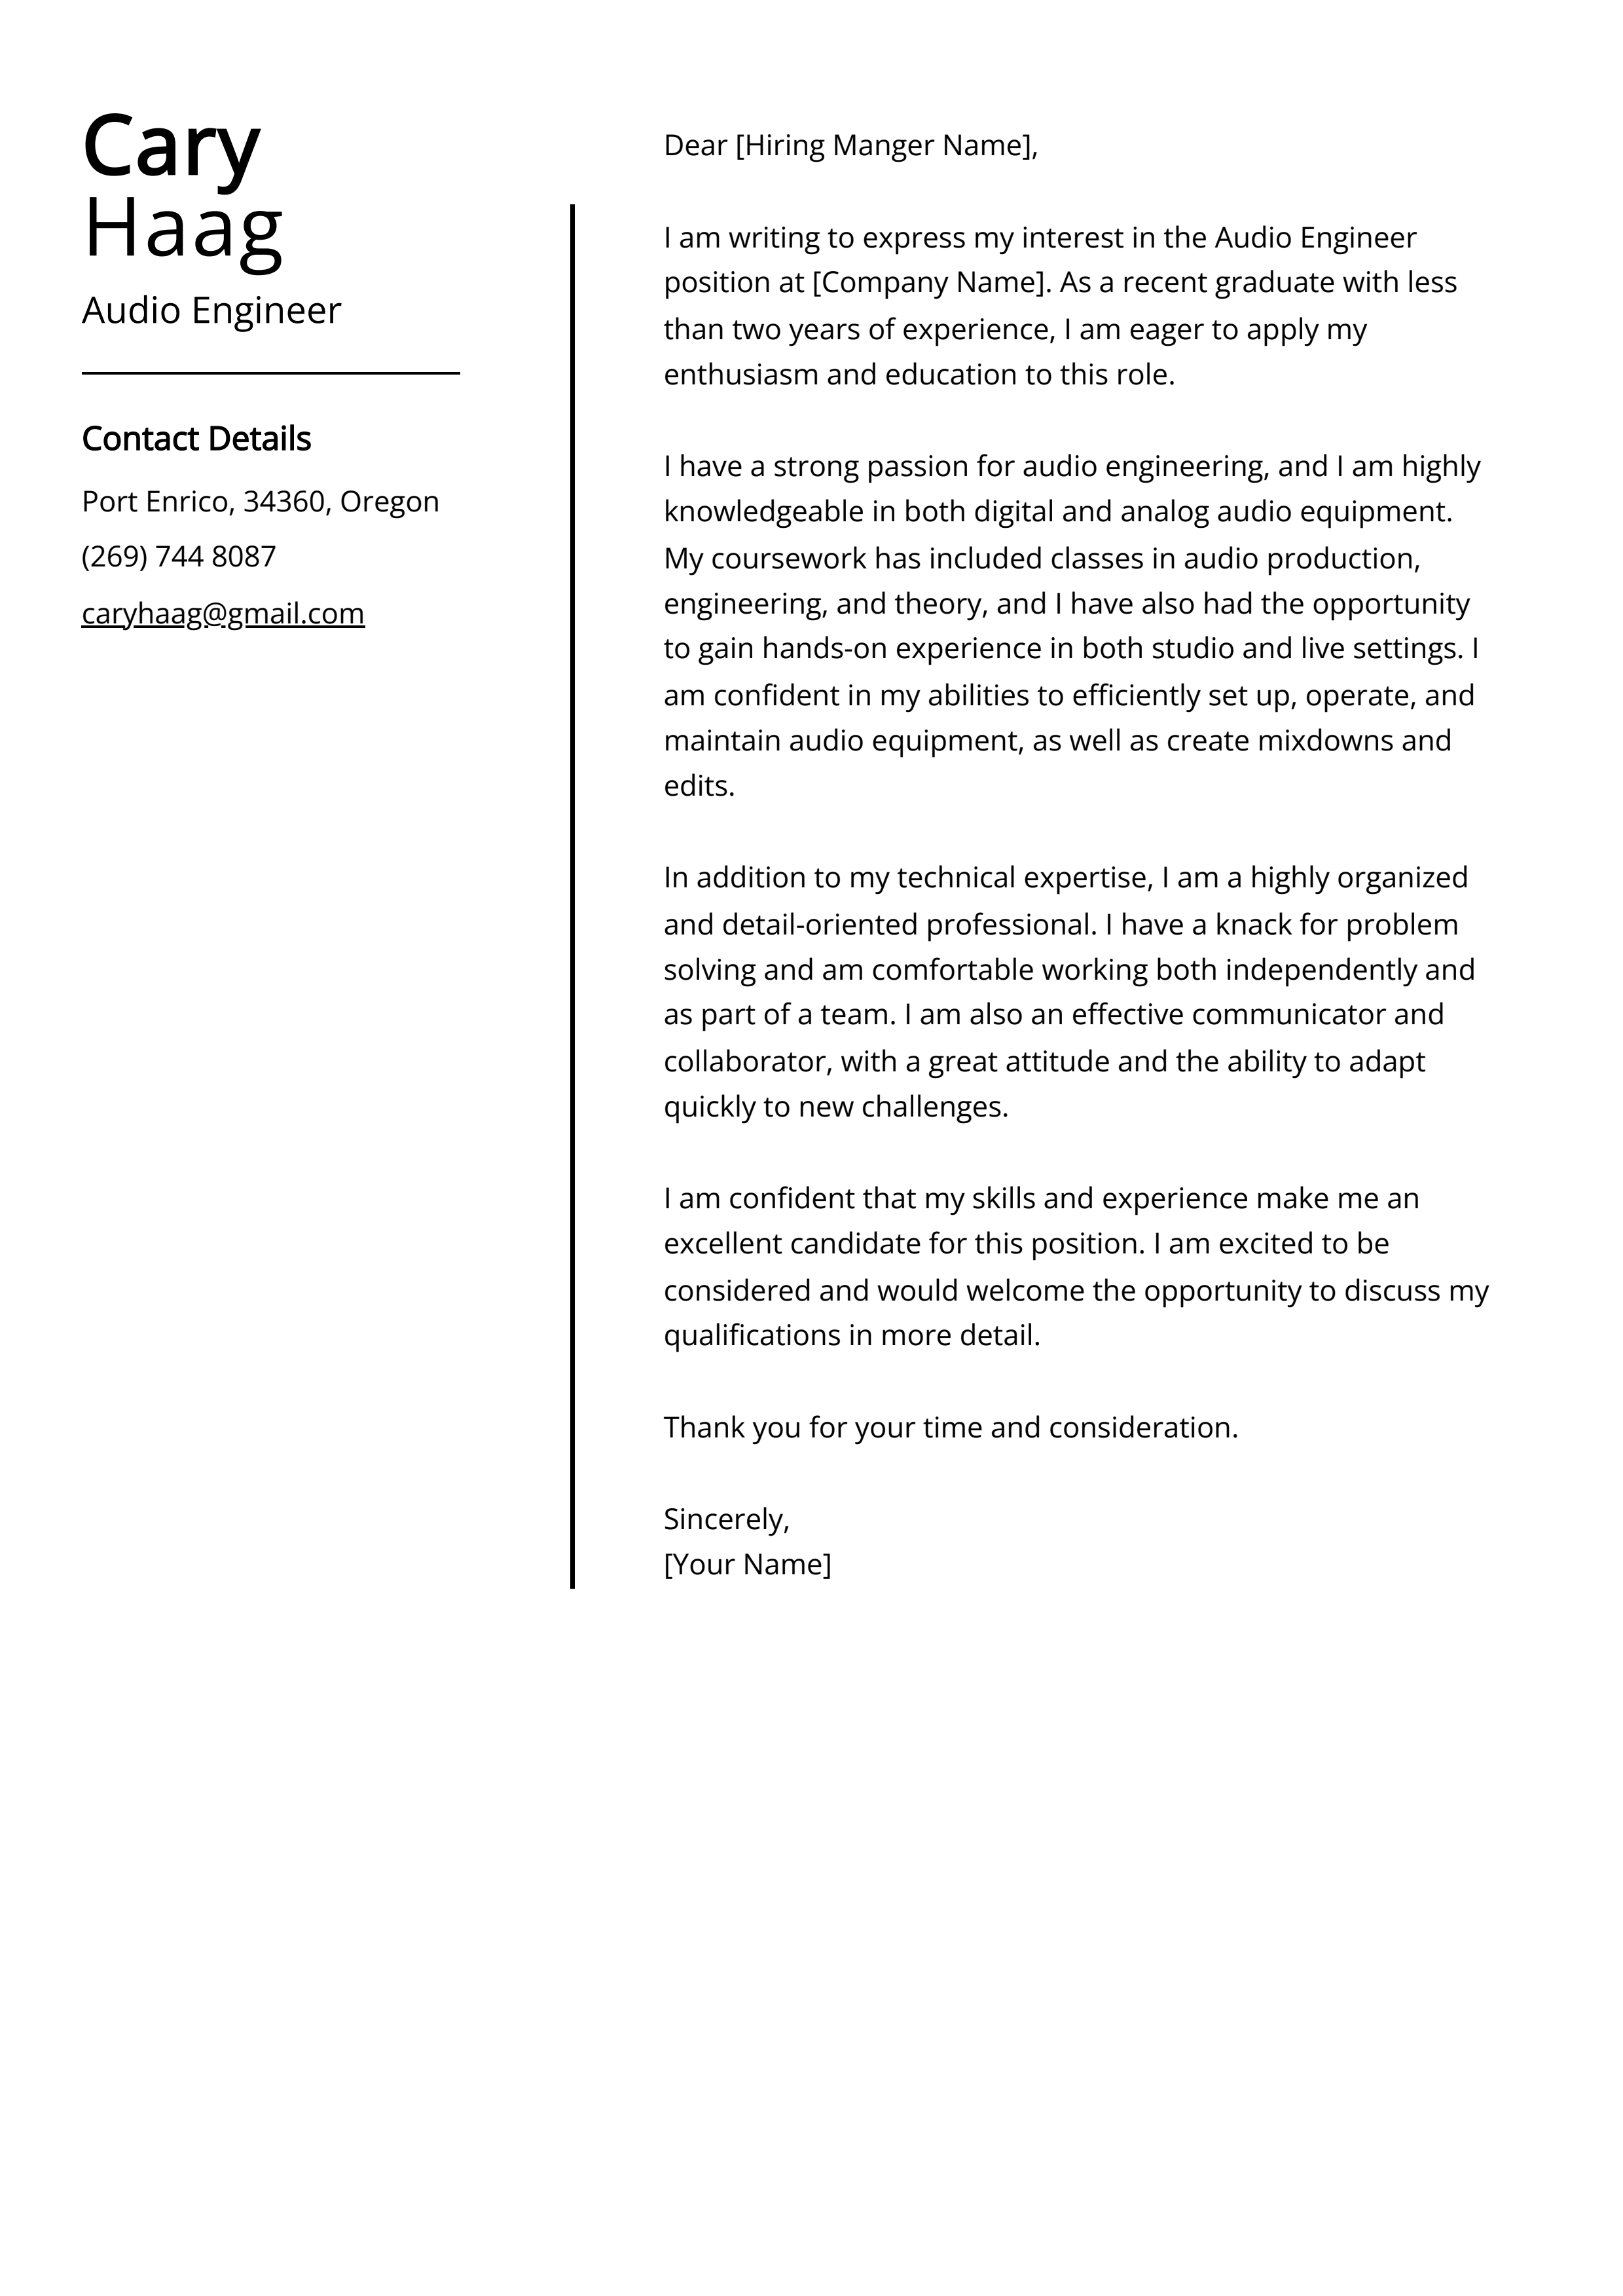 Audio Engineer Cover Letter Example